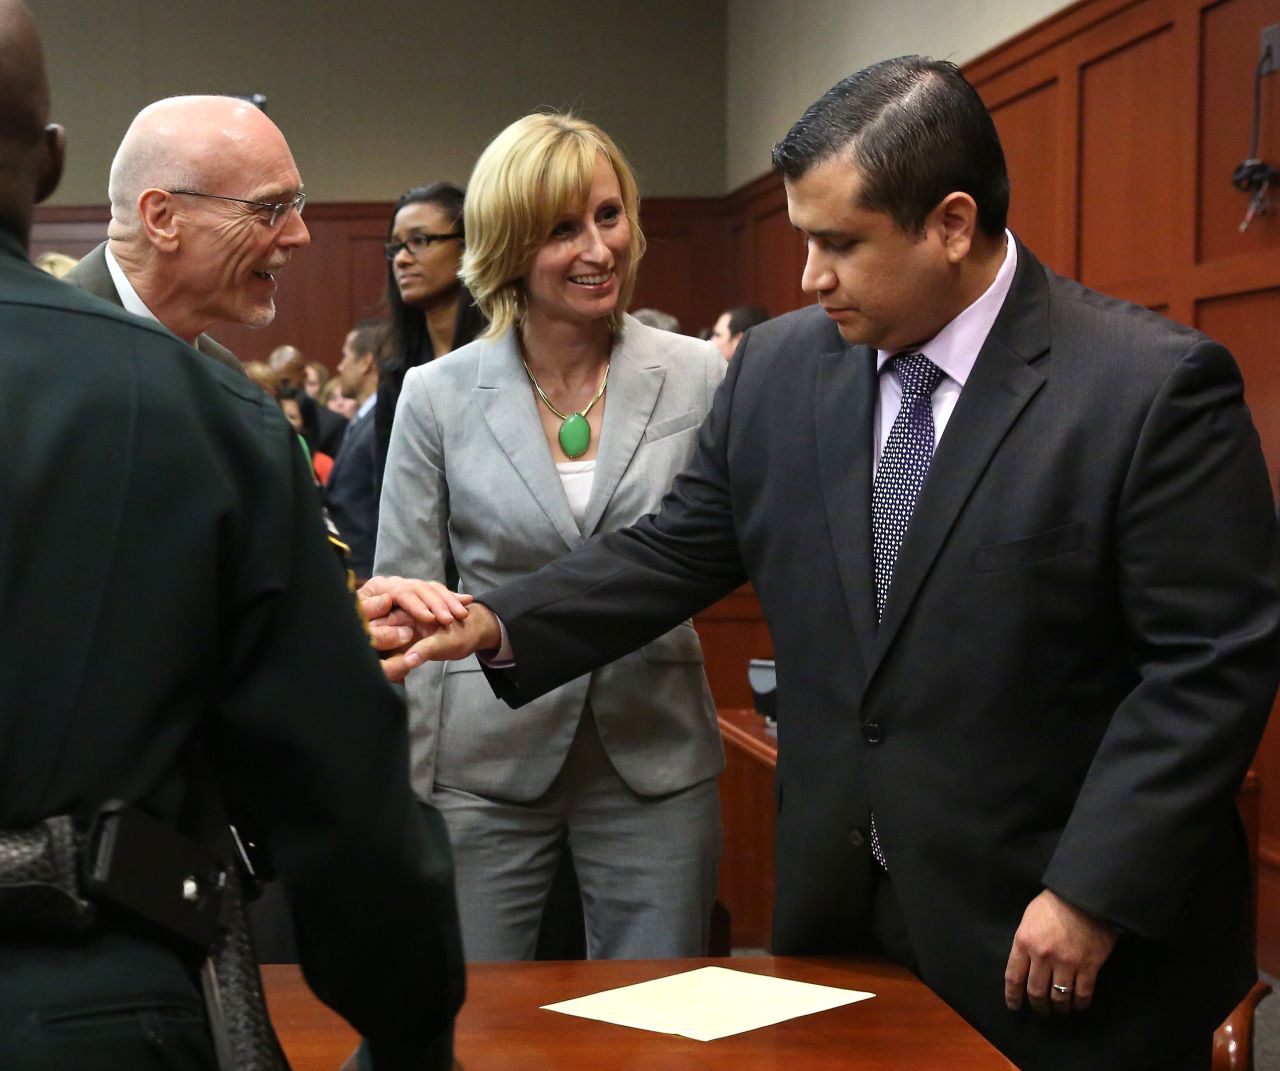 George Zimmerman is congratulated by members of his defense team, Don West and Lorna Truett, after the not guilty verdict is read on Saturday, July 13, in Sanford, Florida. A jury of six women found him  not guilty in the shooting death of Trayvon Martin. <a href="http://www.cnn.com/2013/07/13/justice/gallery/zimmerman-trial-reaction/index.html" target="_blank">View photos of the public reaction to the verdict.</a>